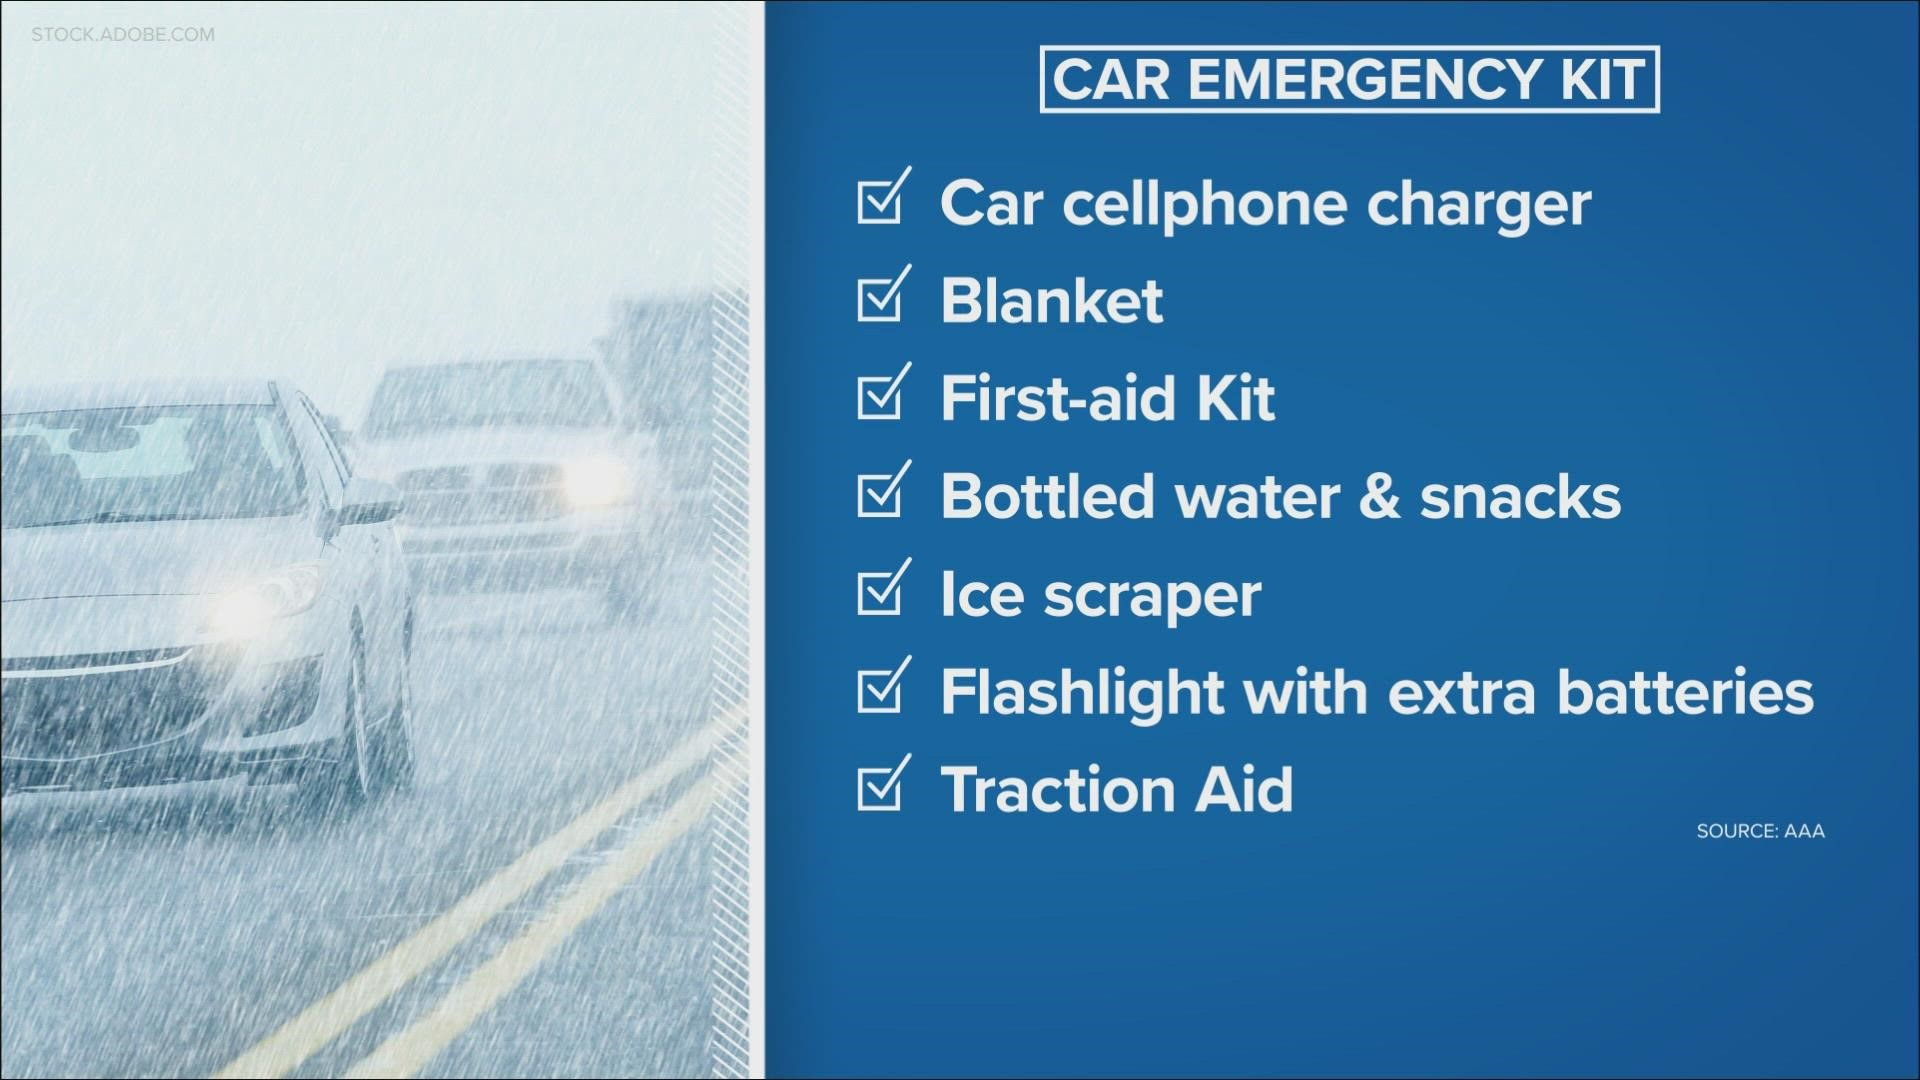 There are some items that could help you in case of an emergency.